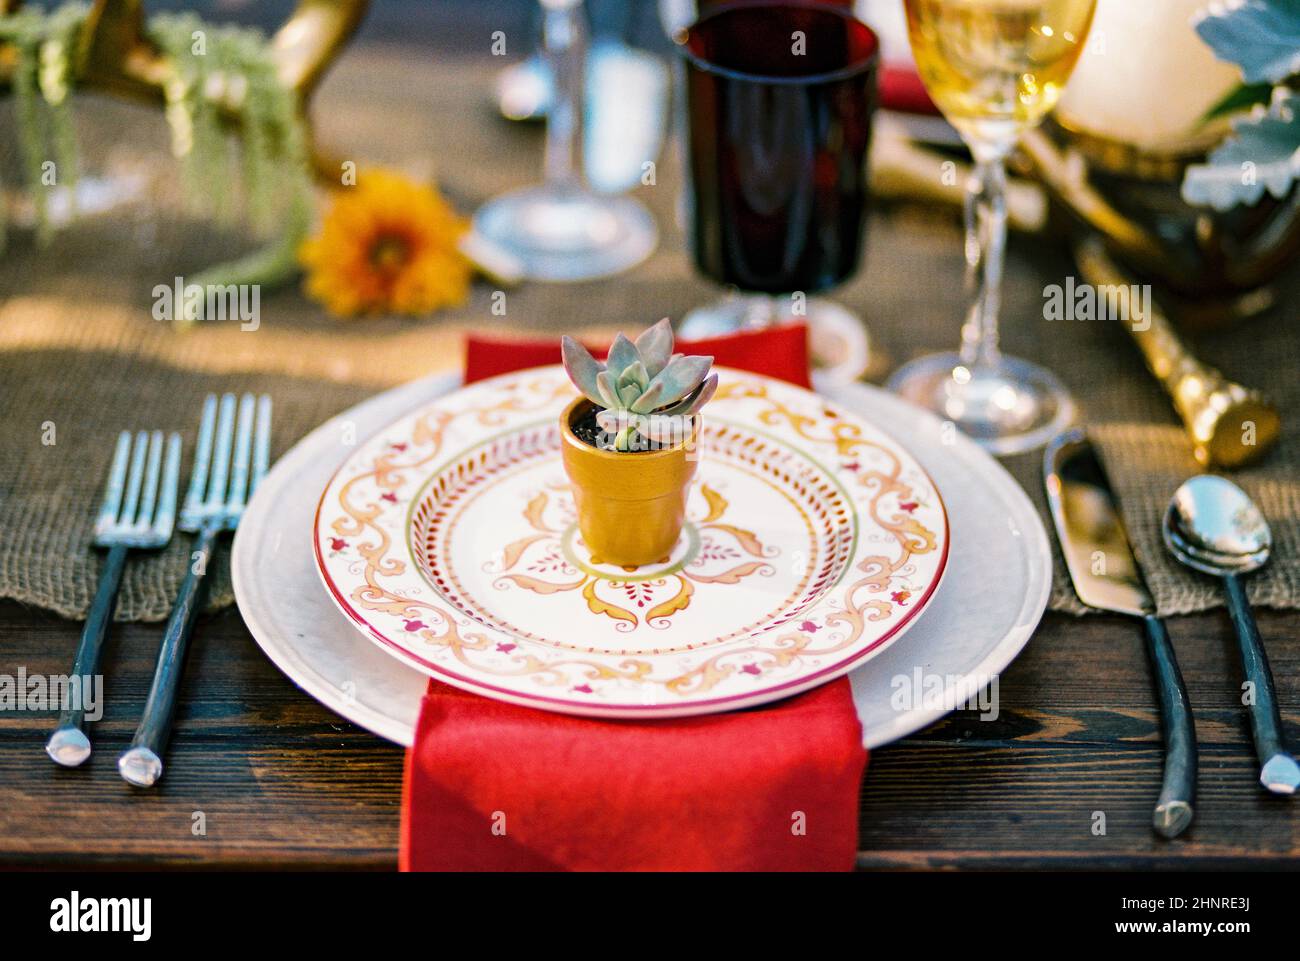 Southwest Styled Place Setting With a Succulent Stock Photo